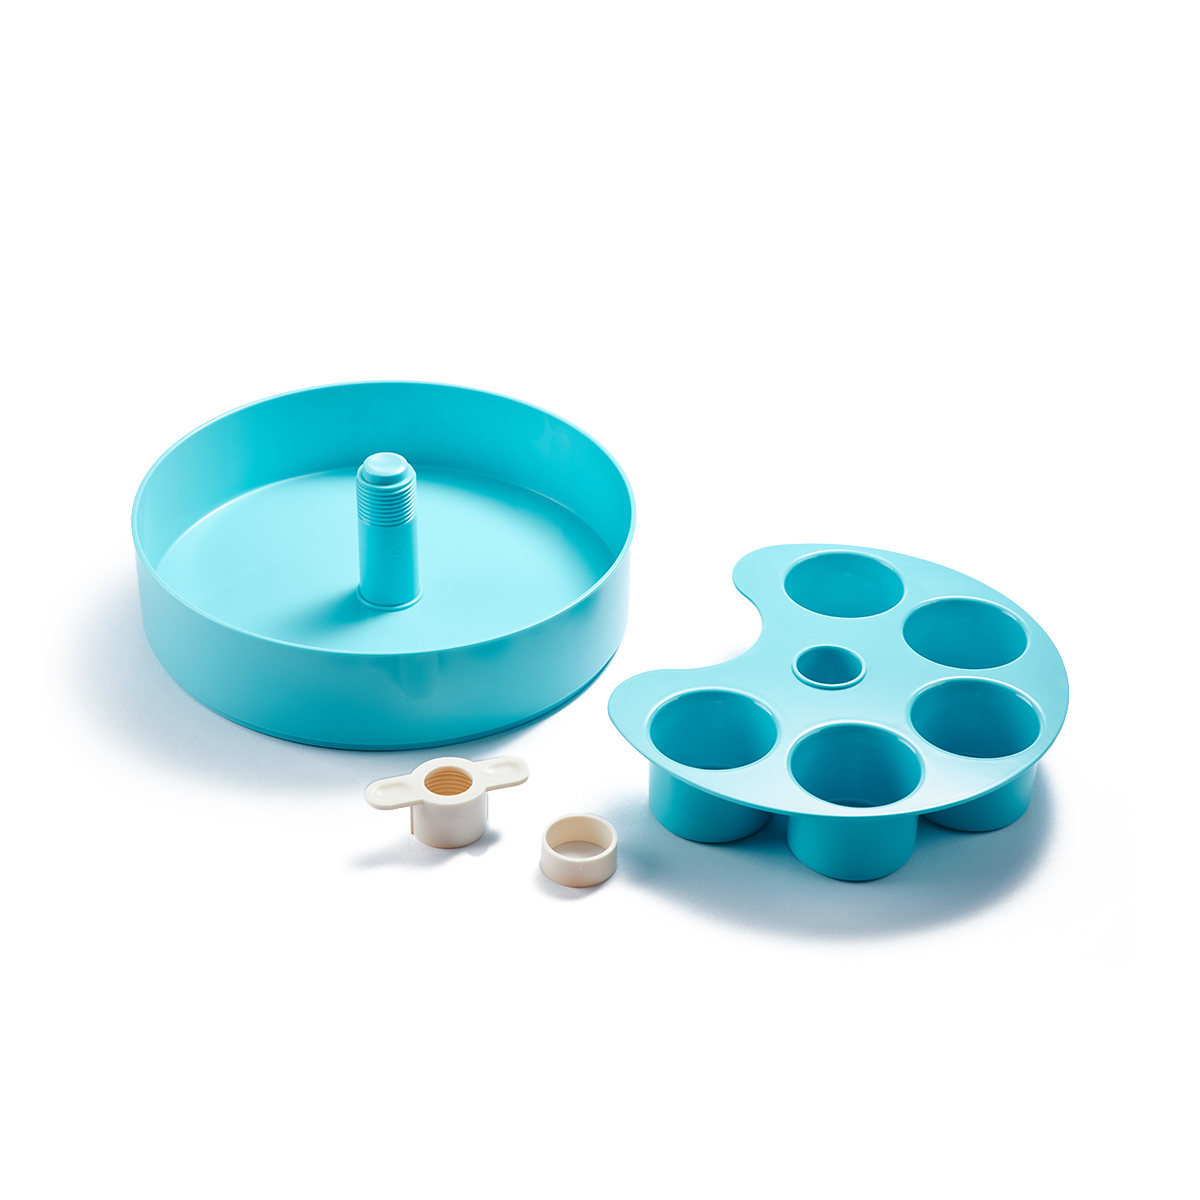 SPIN Interactive Adjustable Slow Feeder for Cats and Dogs - Cups image 4